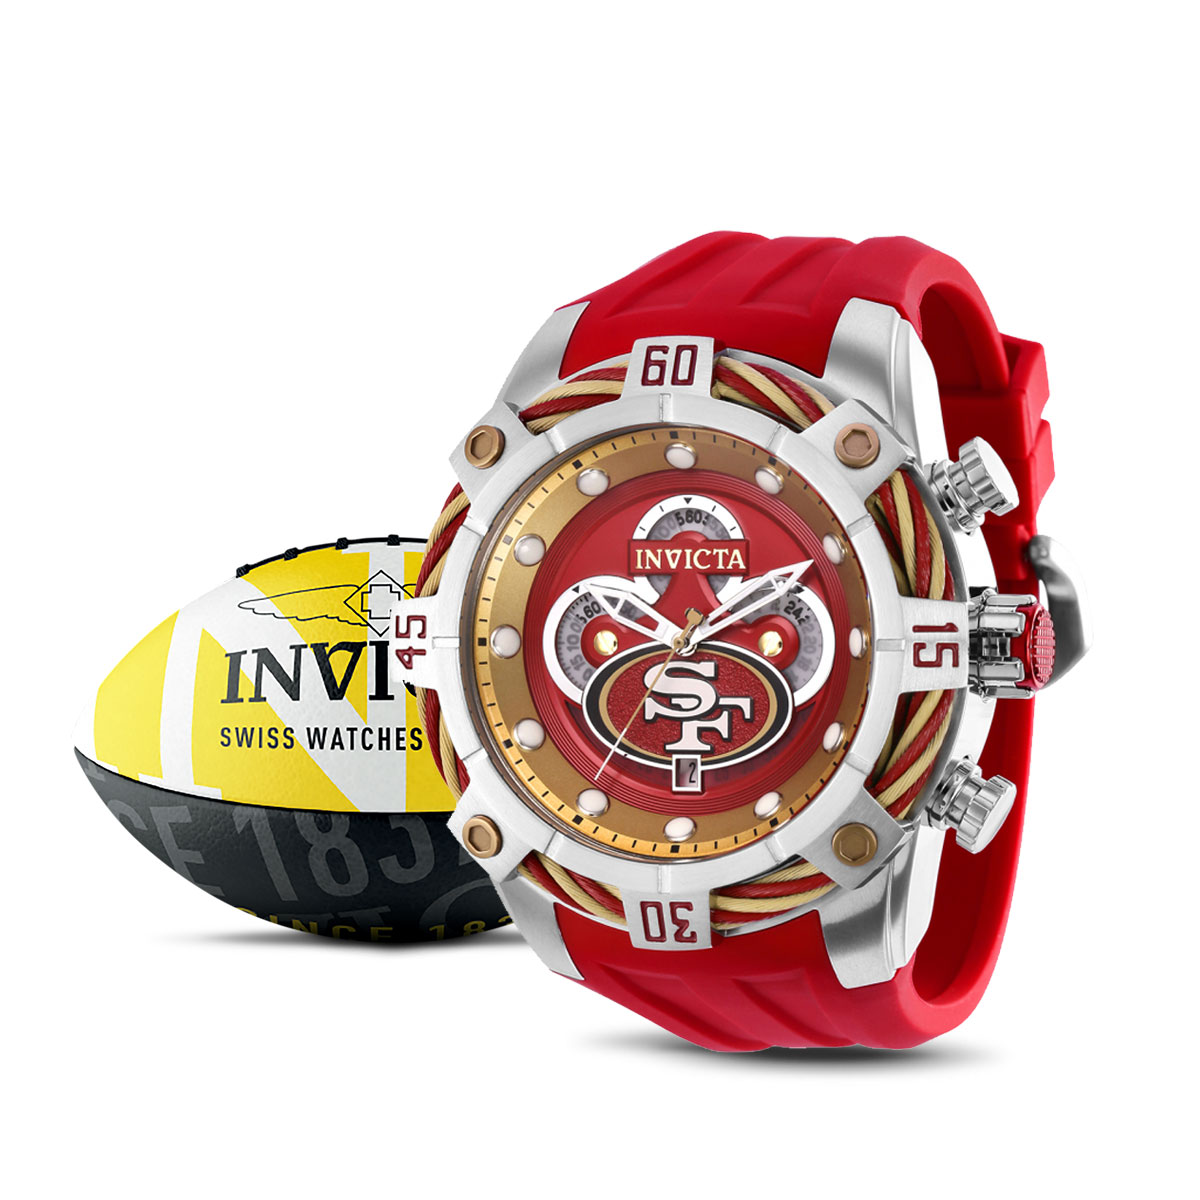 Invicta NFL San Francisco 49ers Men's Watch - 52mm, Red (35863)